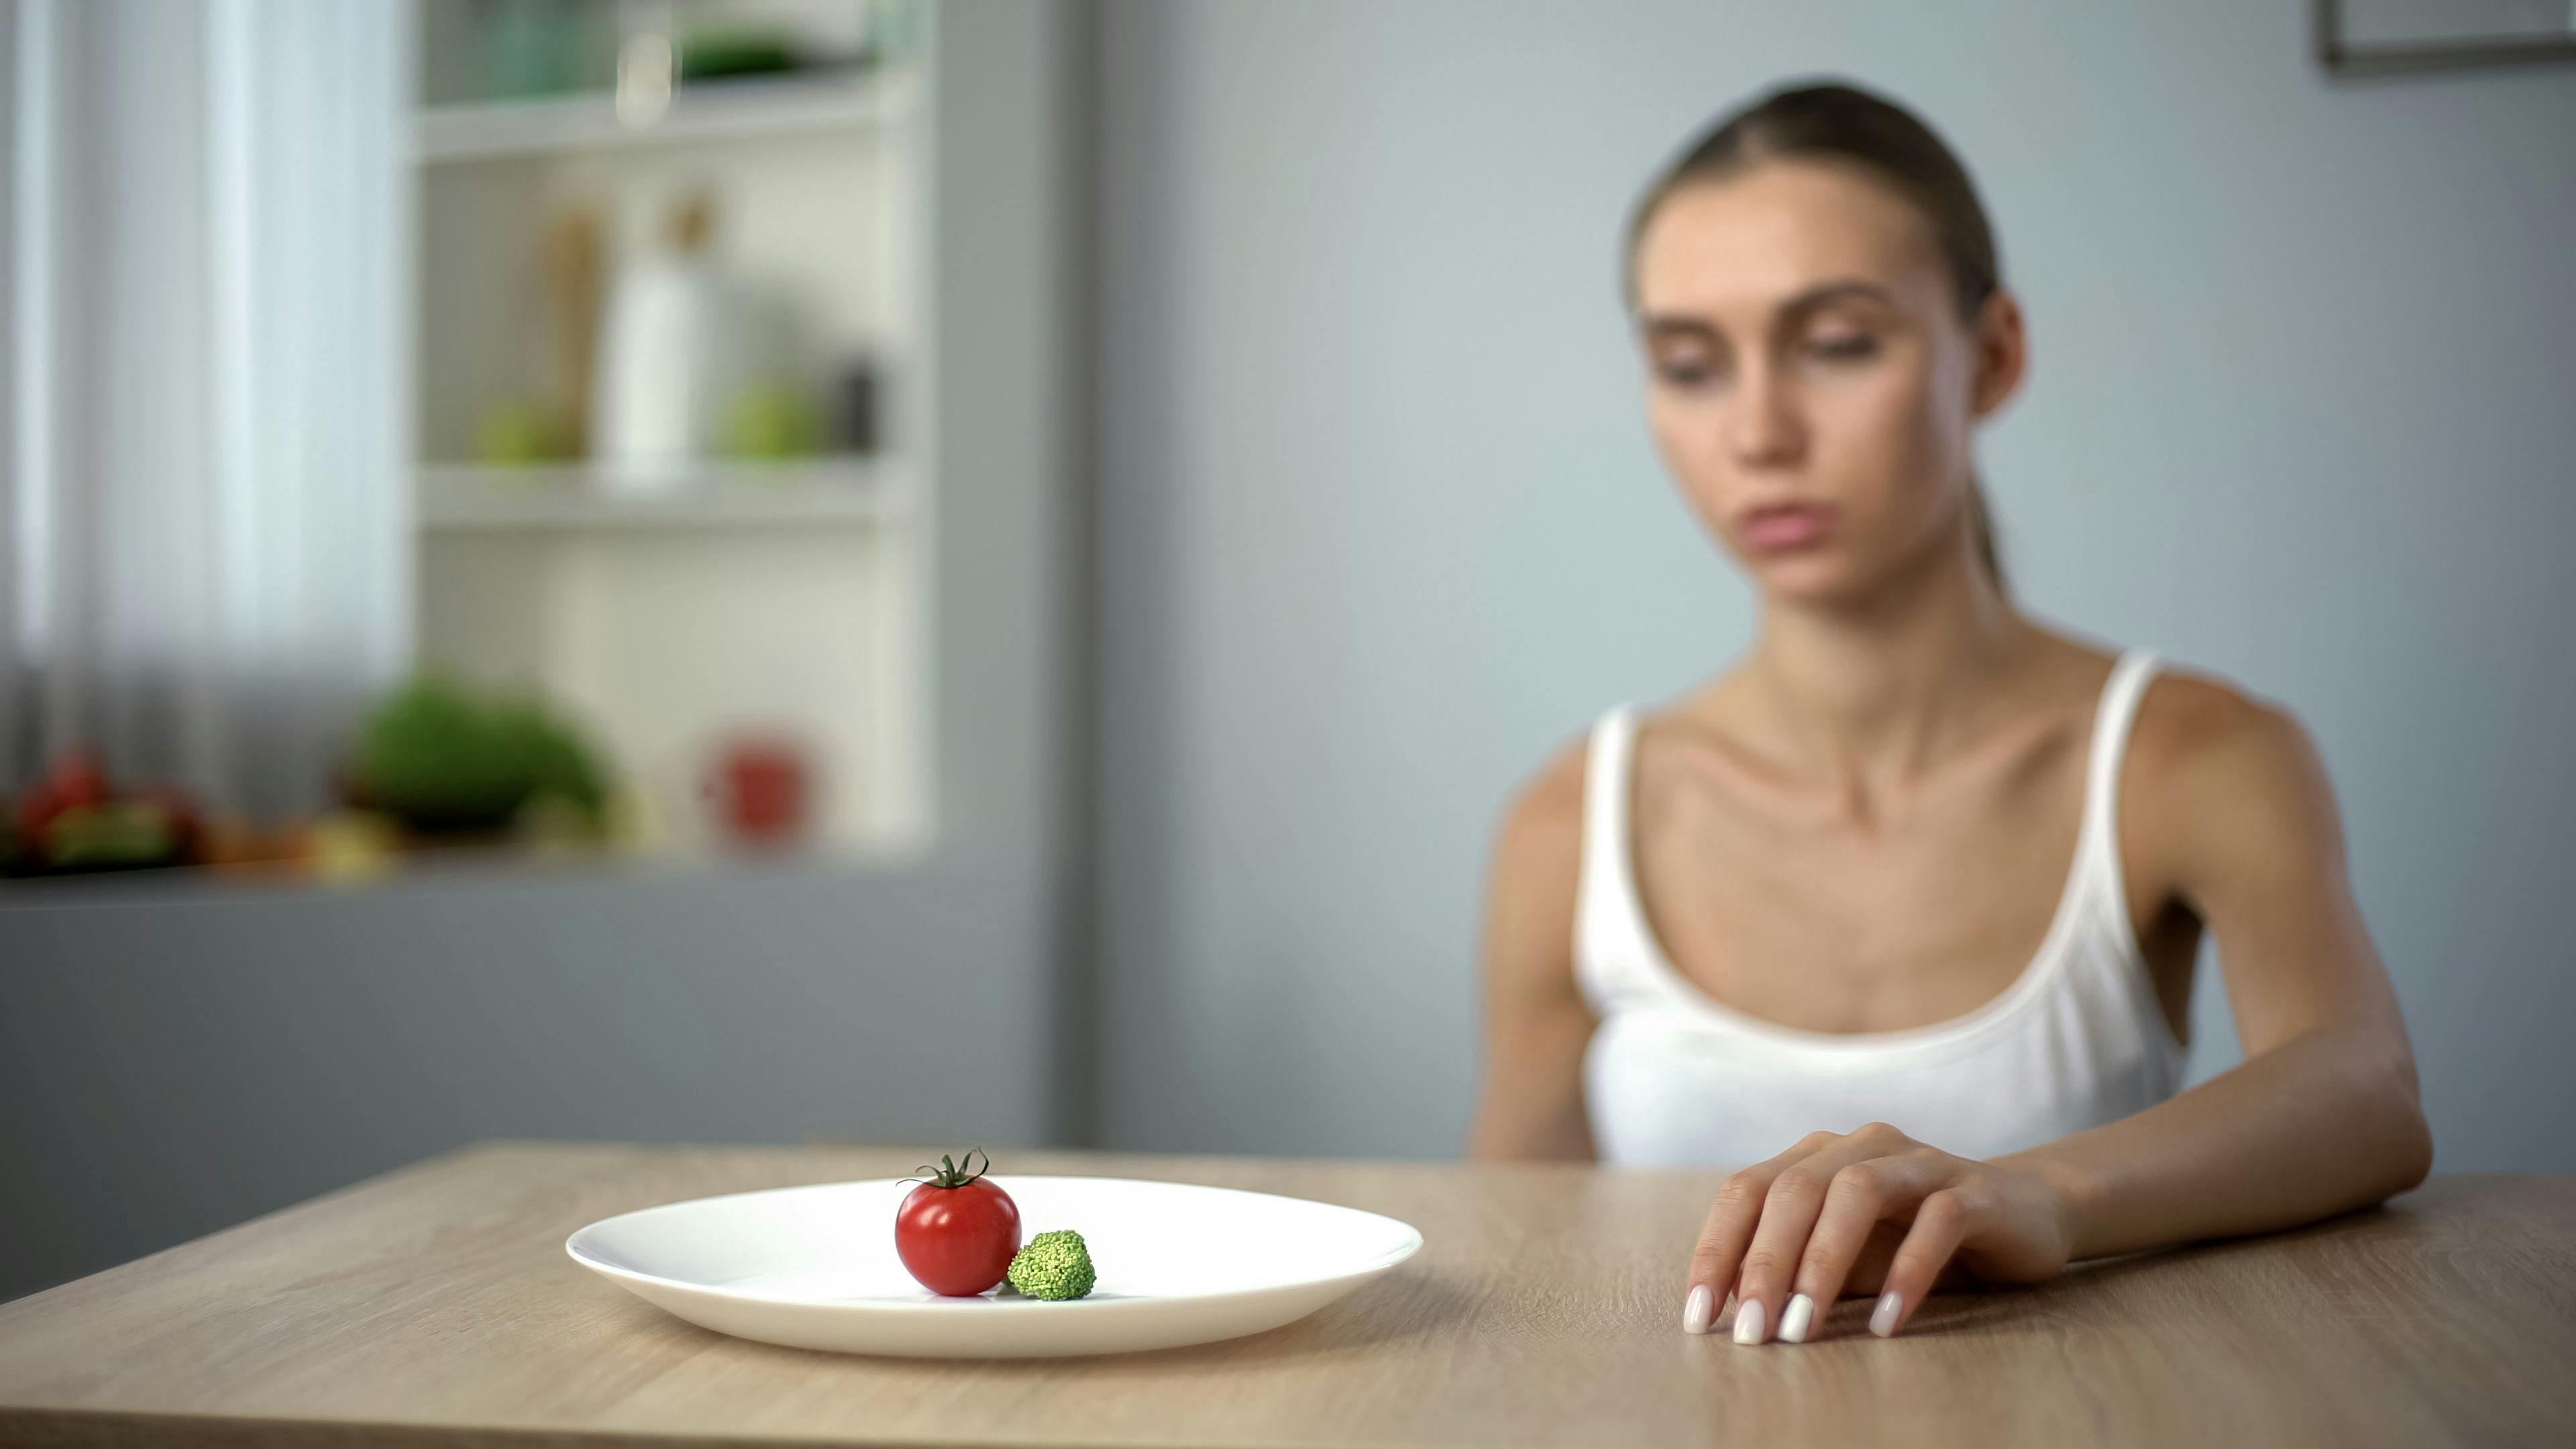 Researchers Identify the Neurological Mechanism Behind Anorexia Nervosa